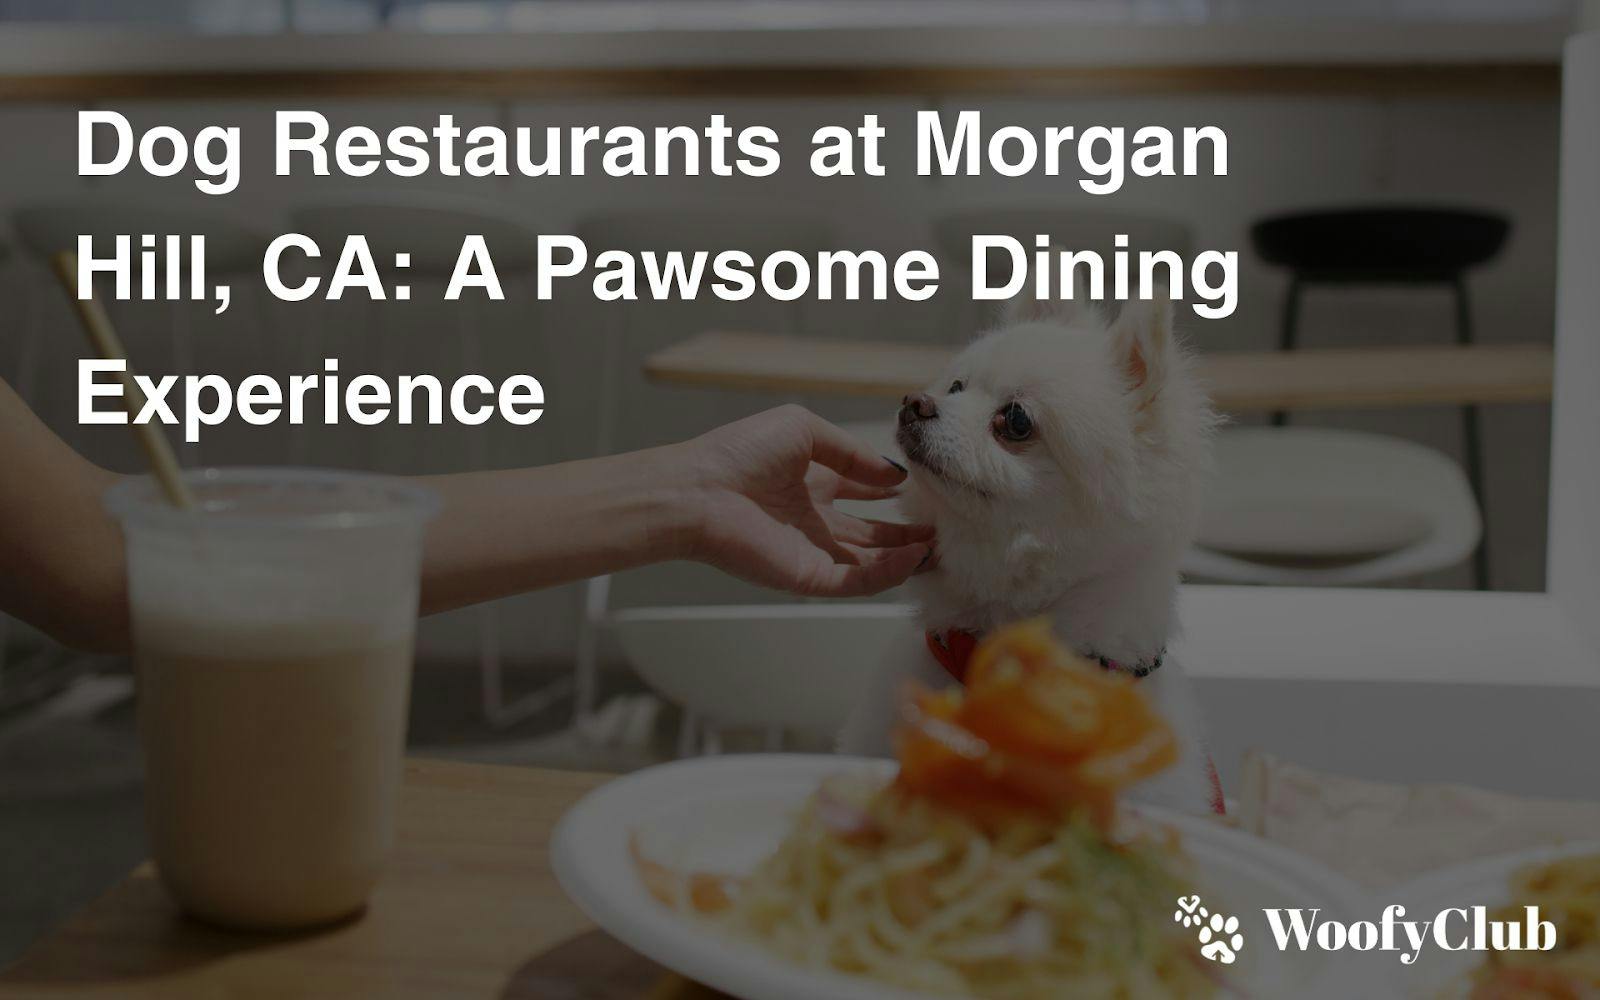 Dog Restaurants At Morgan Hill, CA: A Pawsome Dining Experience